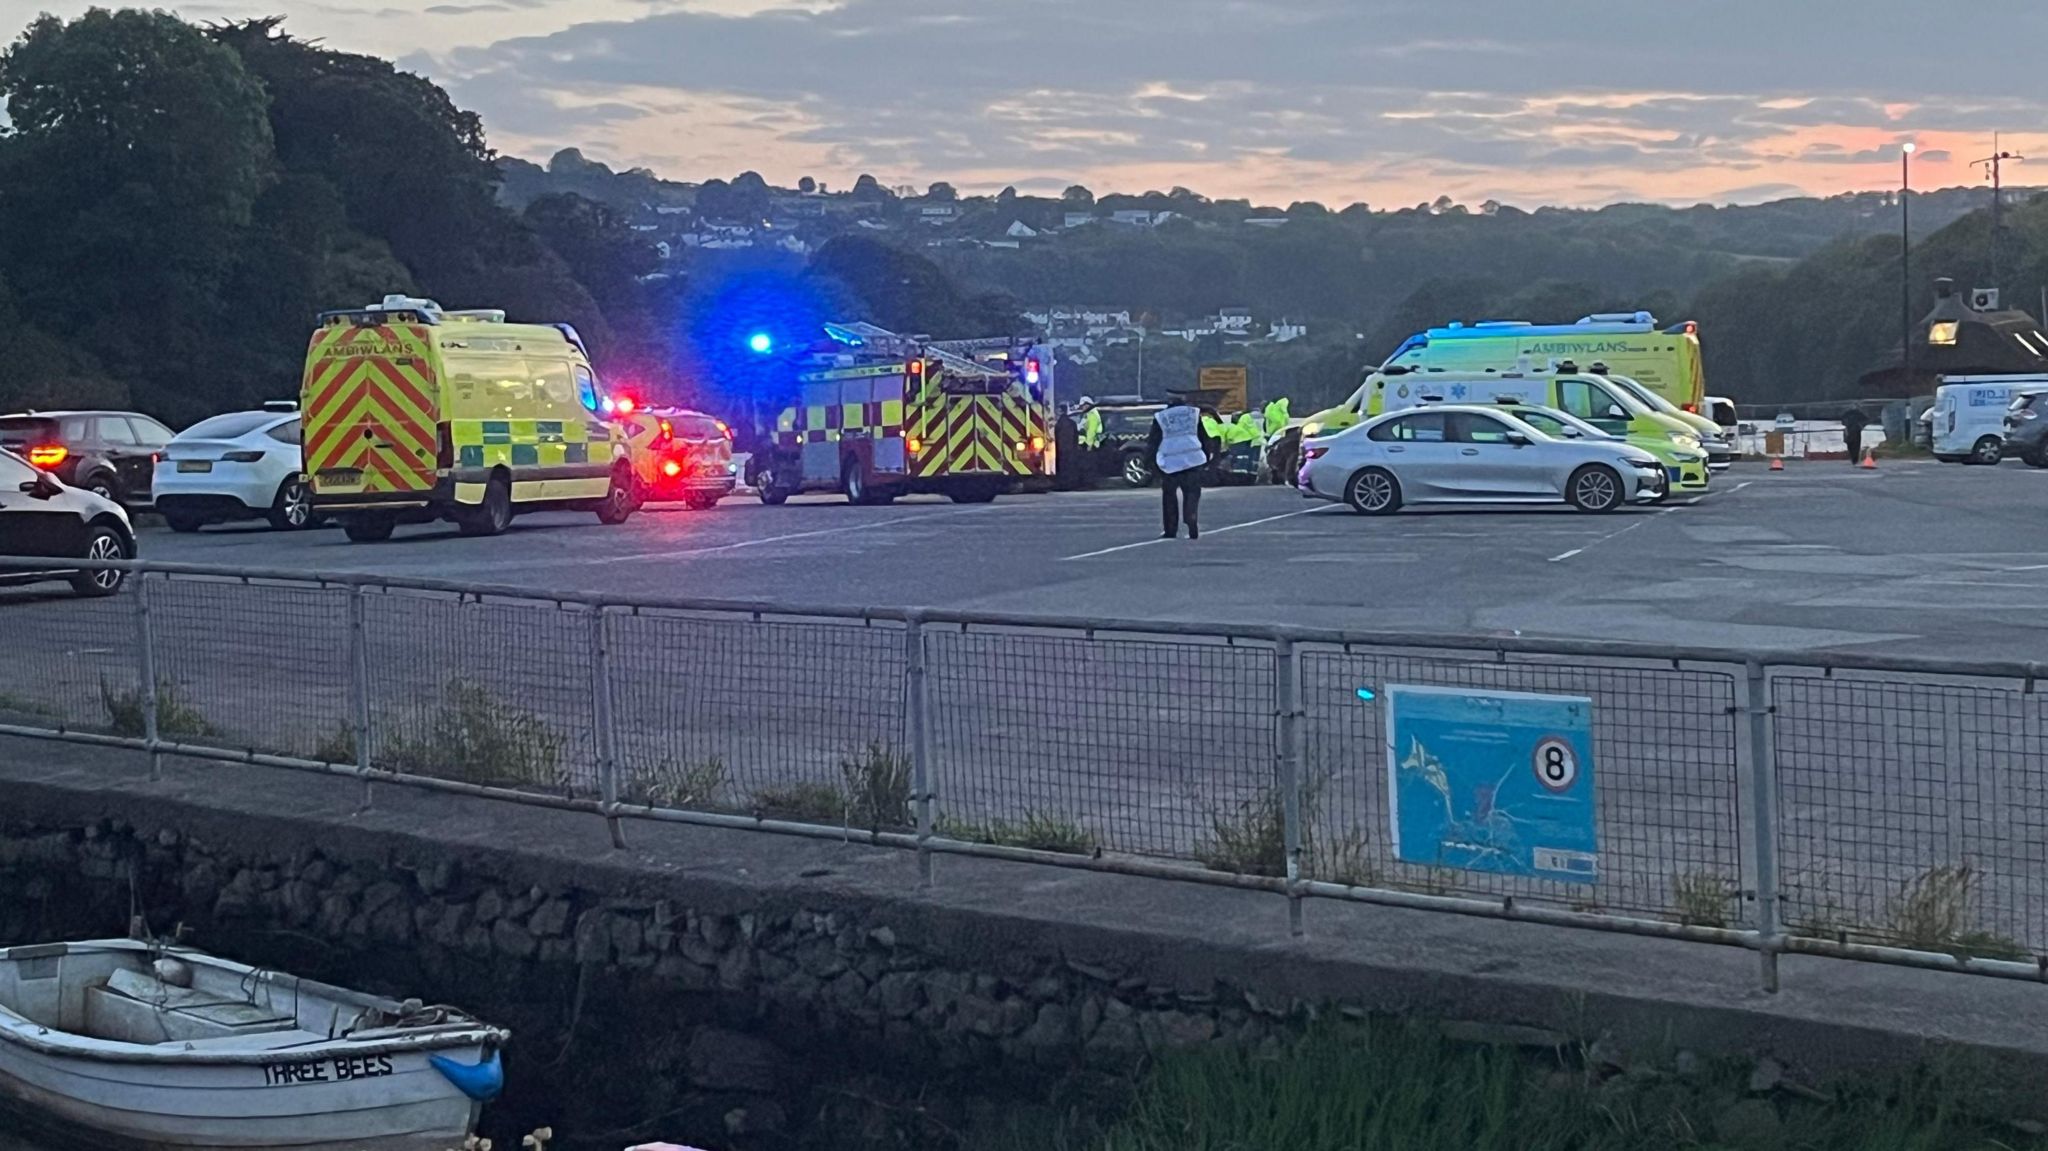 Ambulances and police cars parked in a car park by the river last night